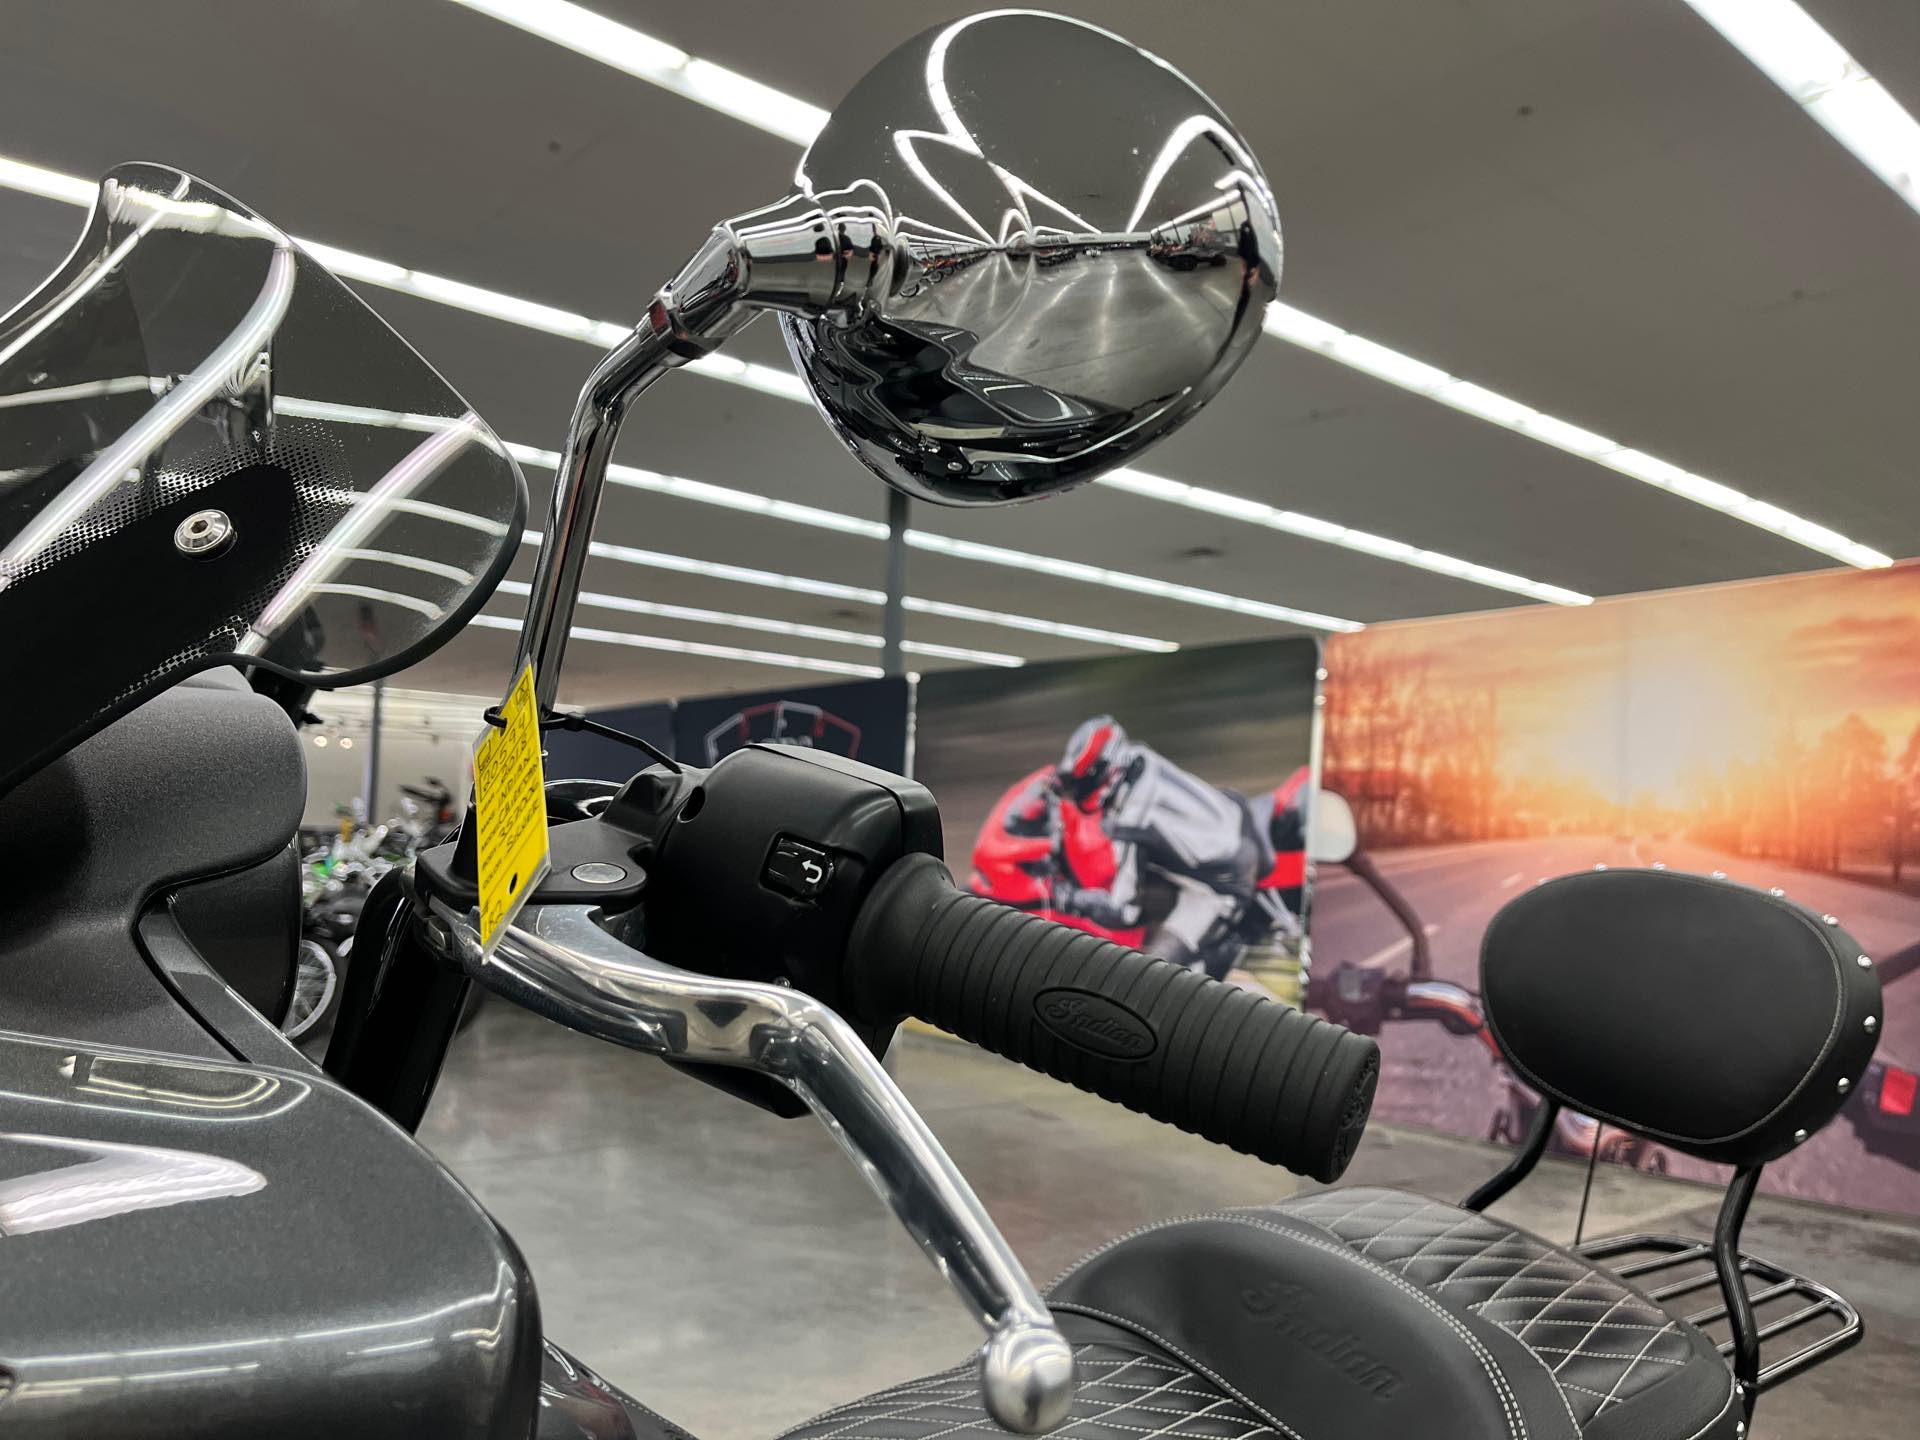 2018 Indian Motorcycle Chieftain Base at Aces Motorcycles - Denver